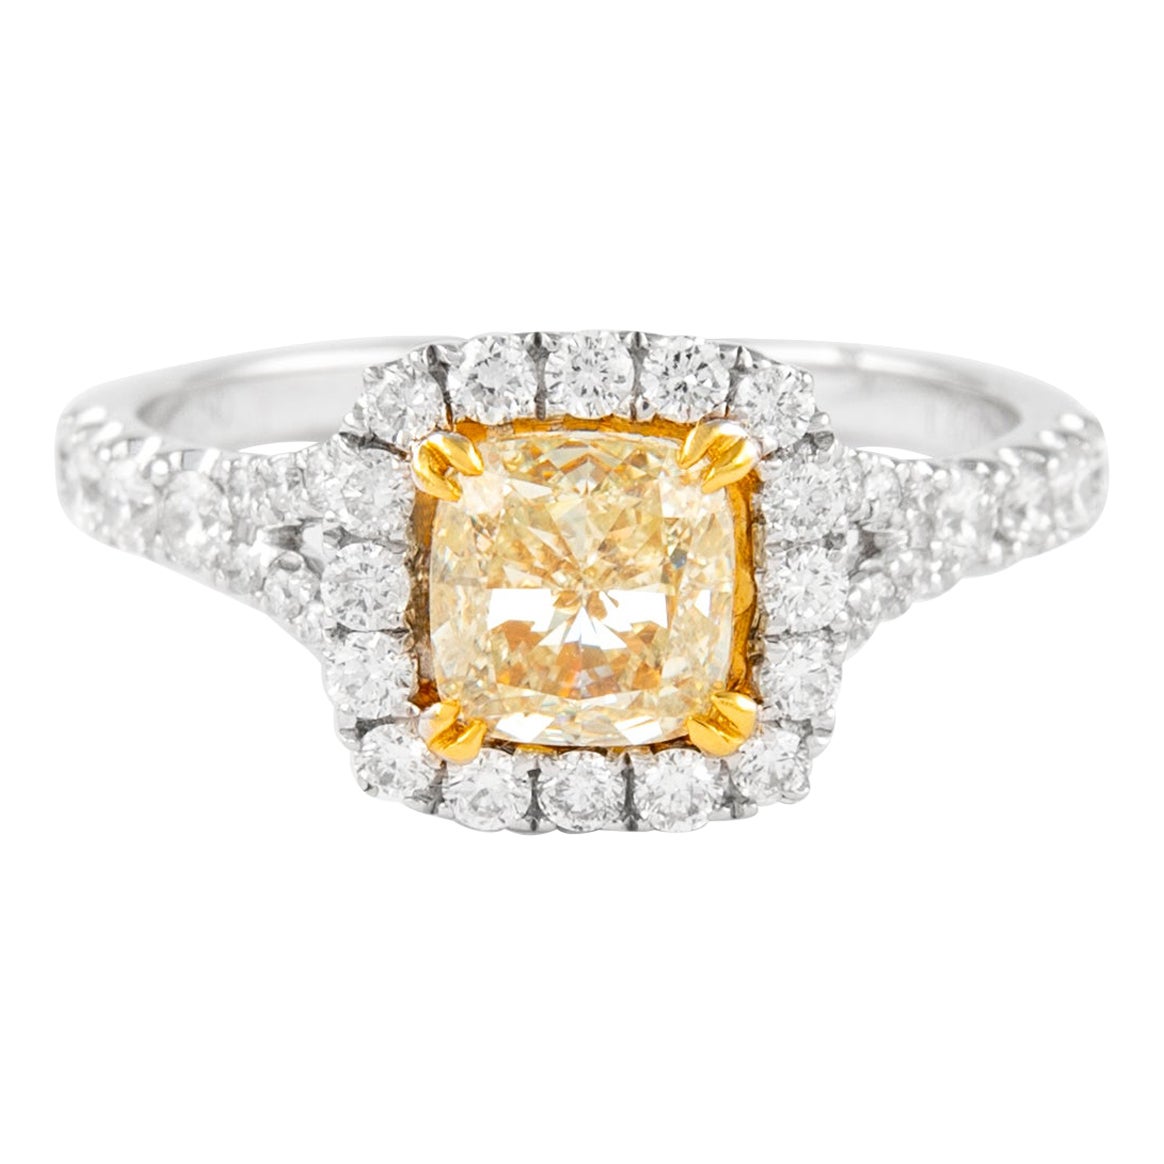 Alexander 2.13ctt Fancy Yellow Cushion Diamond with Halo Ring 18k Two Tone For Sale